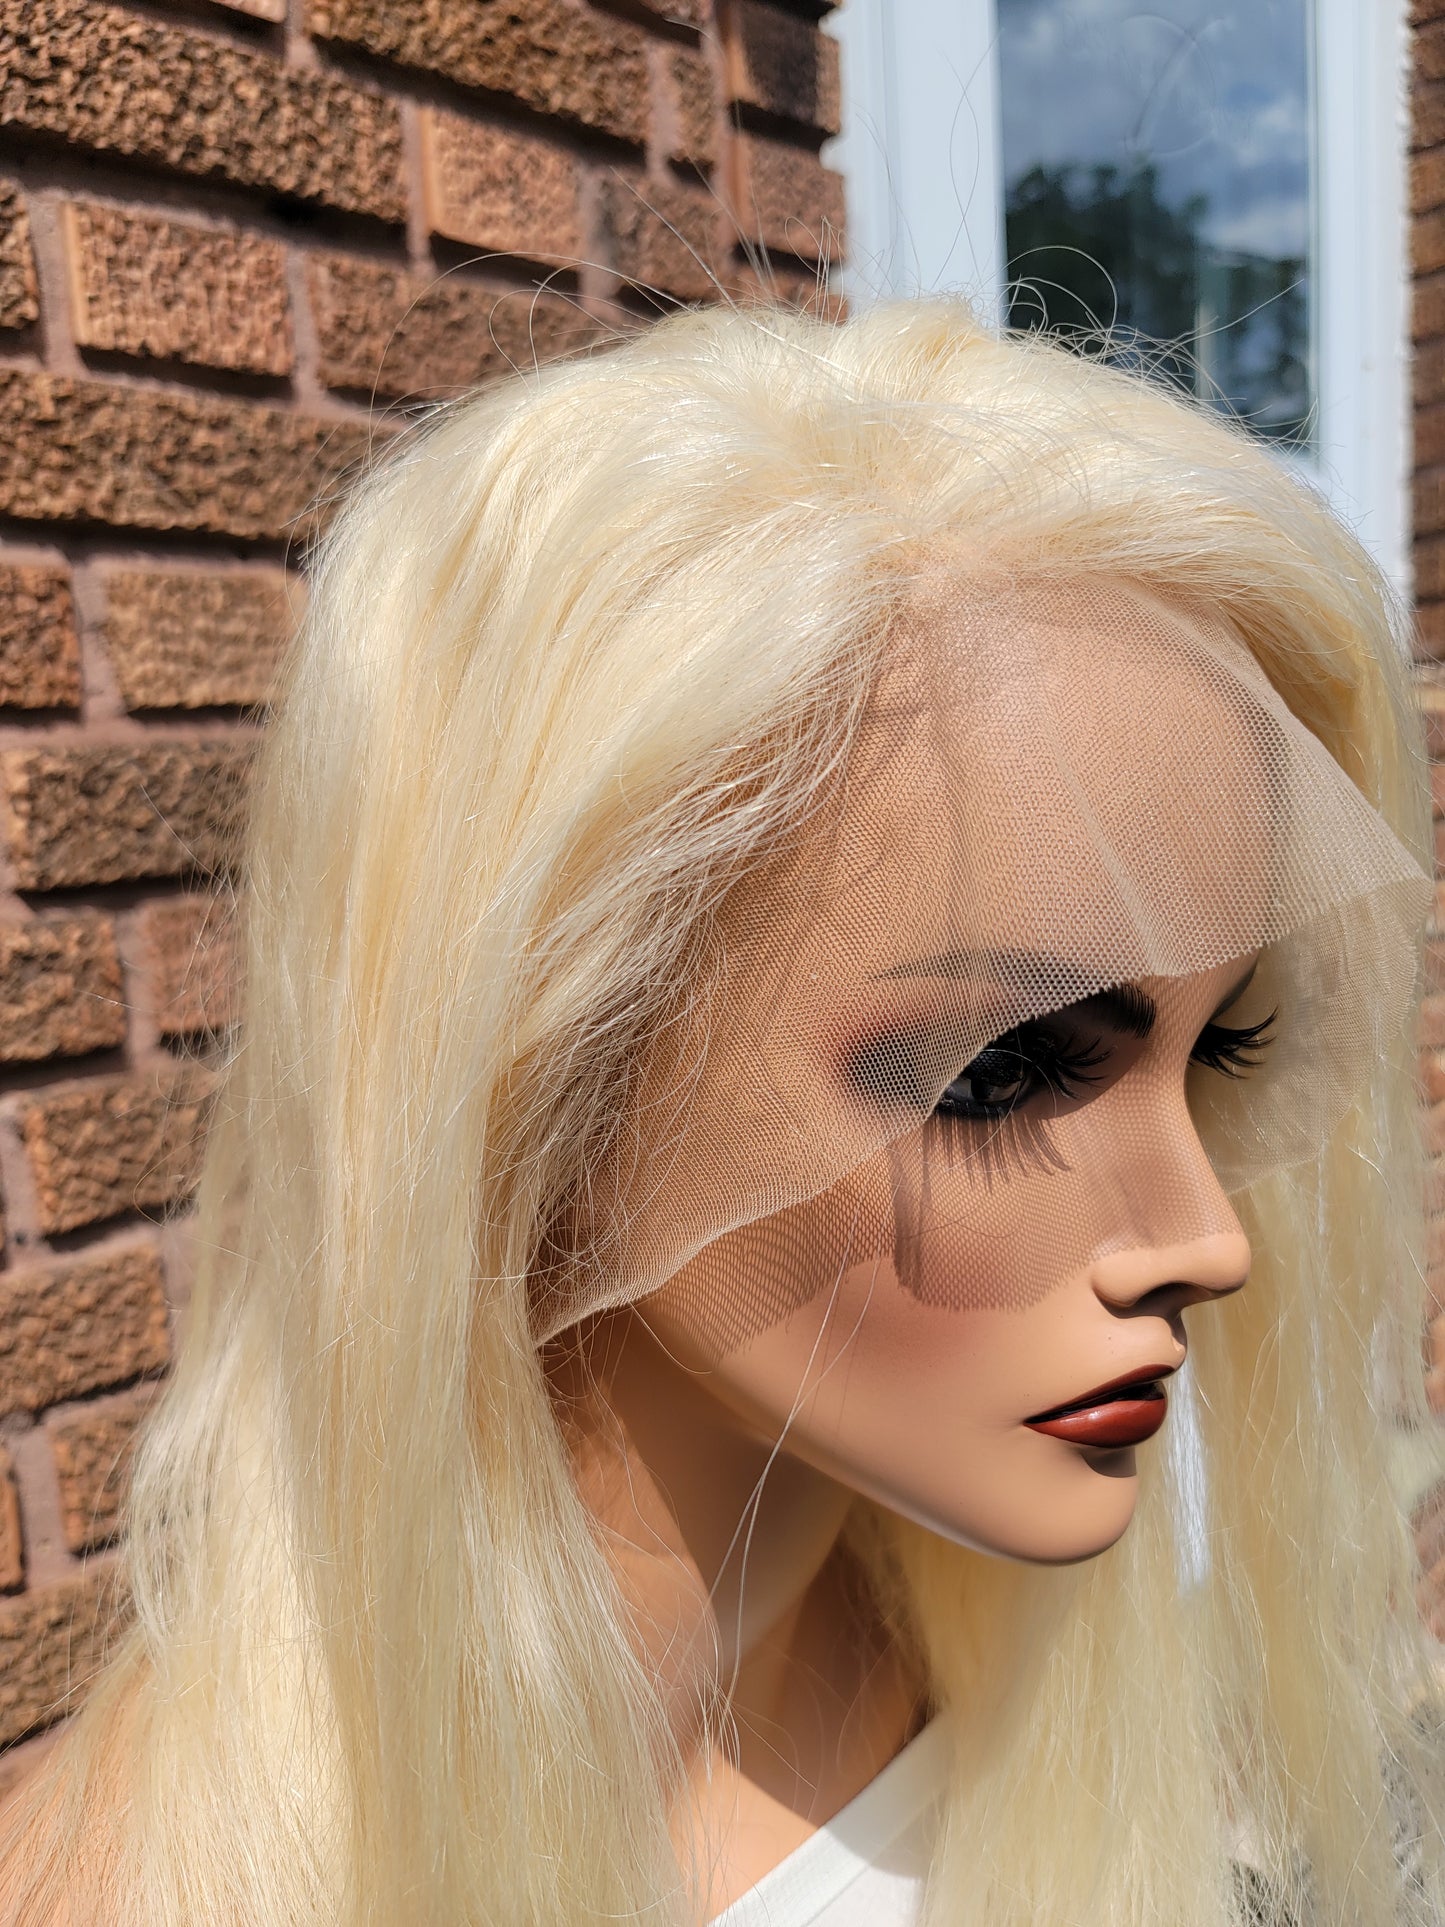 Daphne L Johnson Hair Collection Blank Slate Wig for sale!